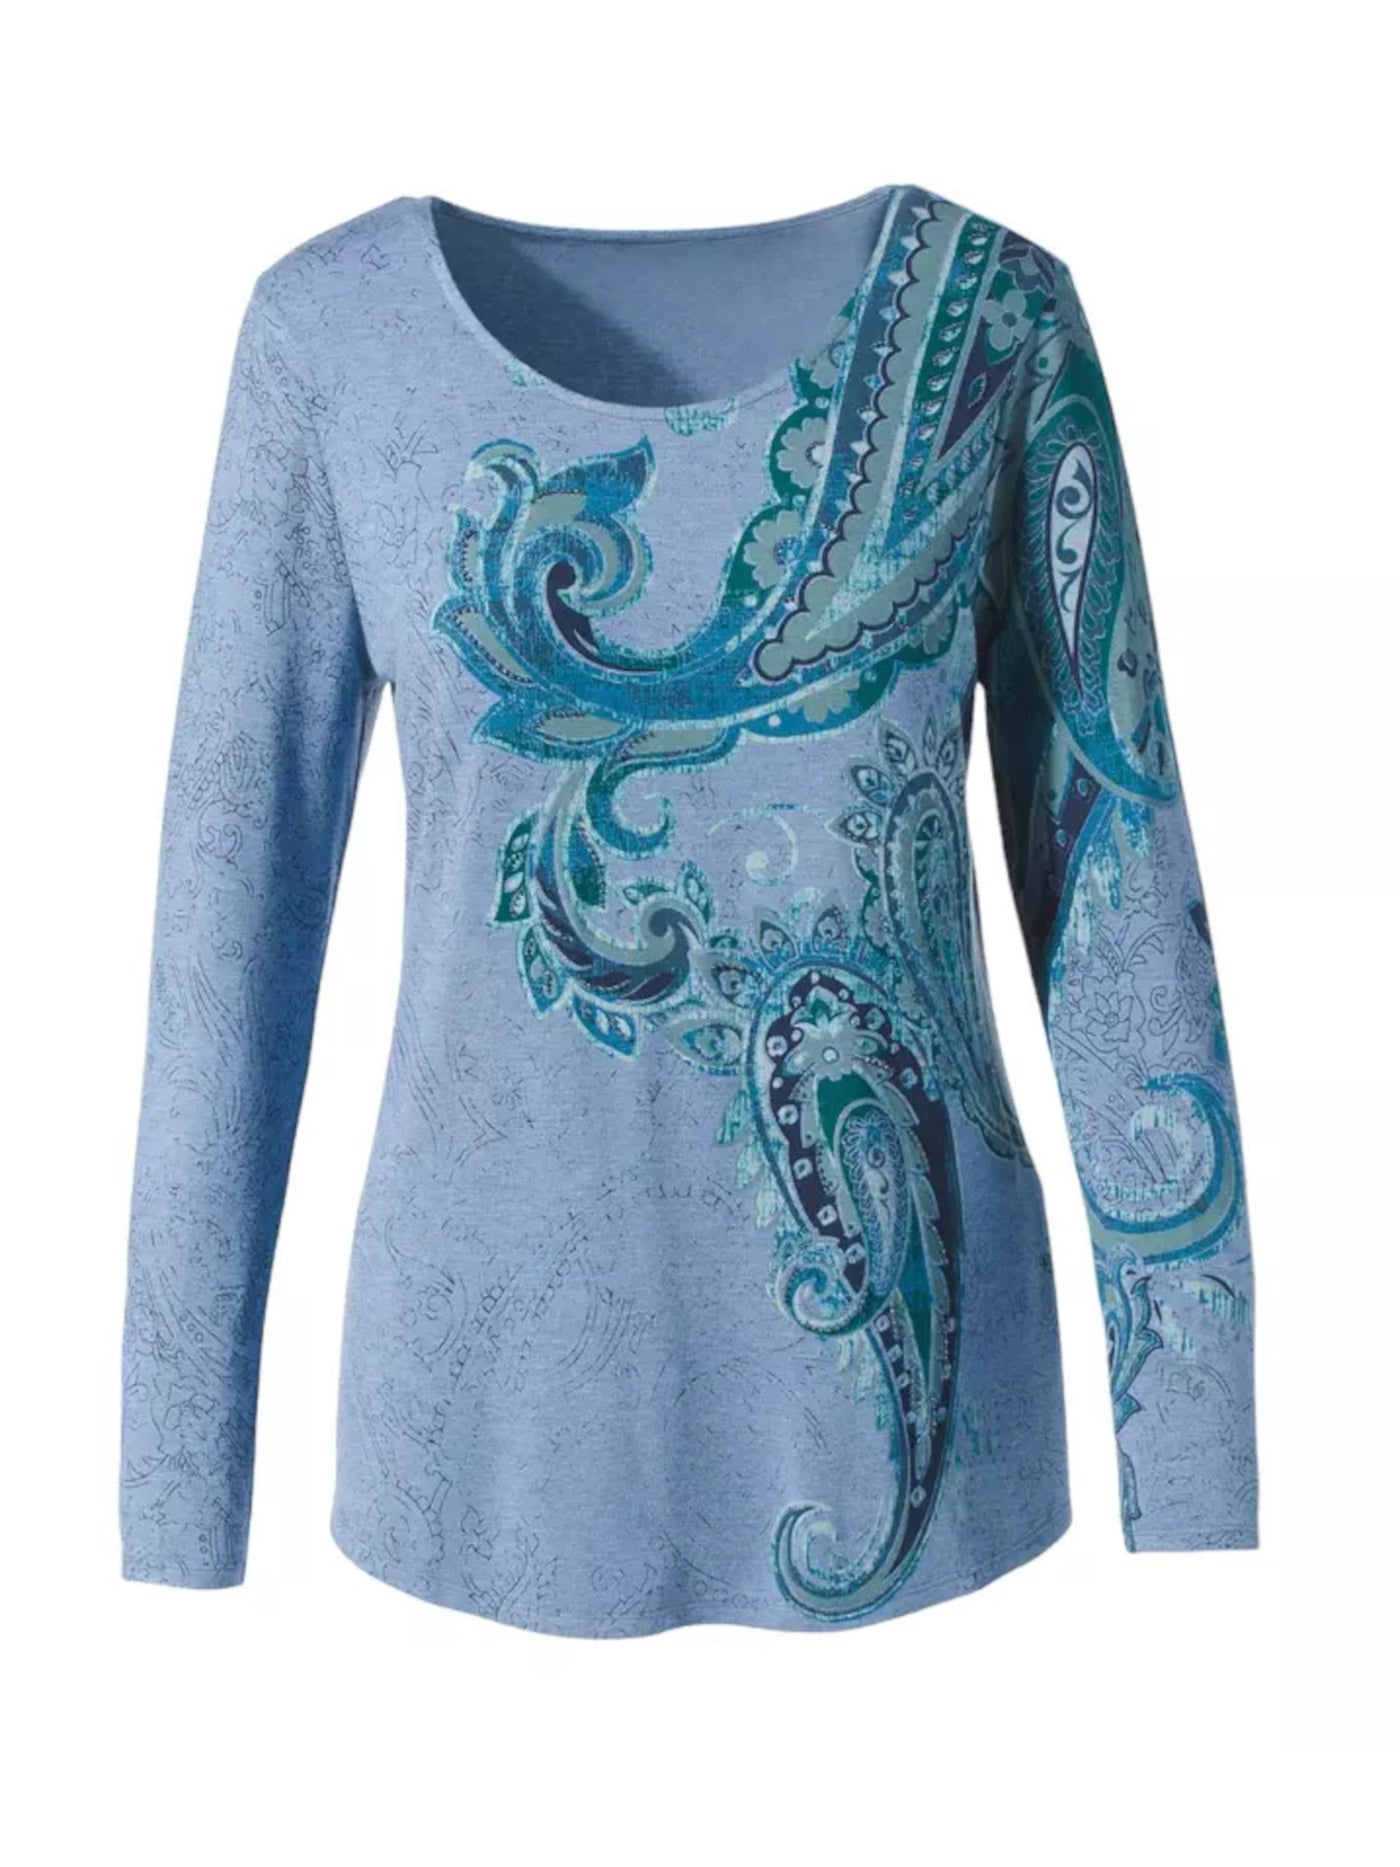 CHICOS Womens Blue Paisley Long Sleeve Scoop Neck T-Shirt 0(4\6)